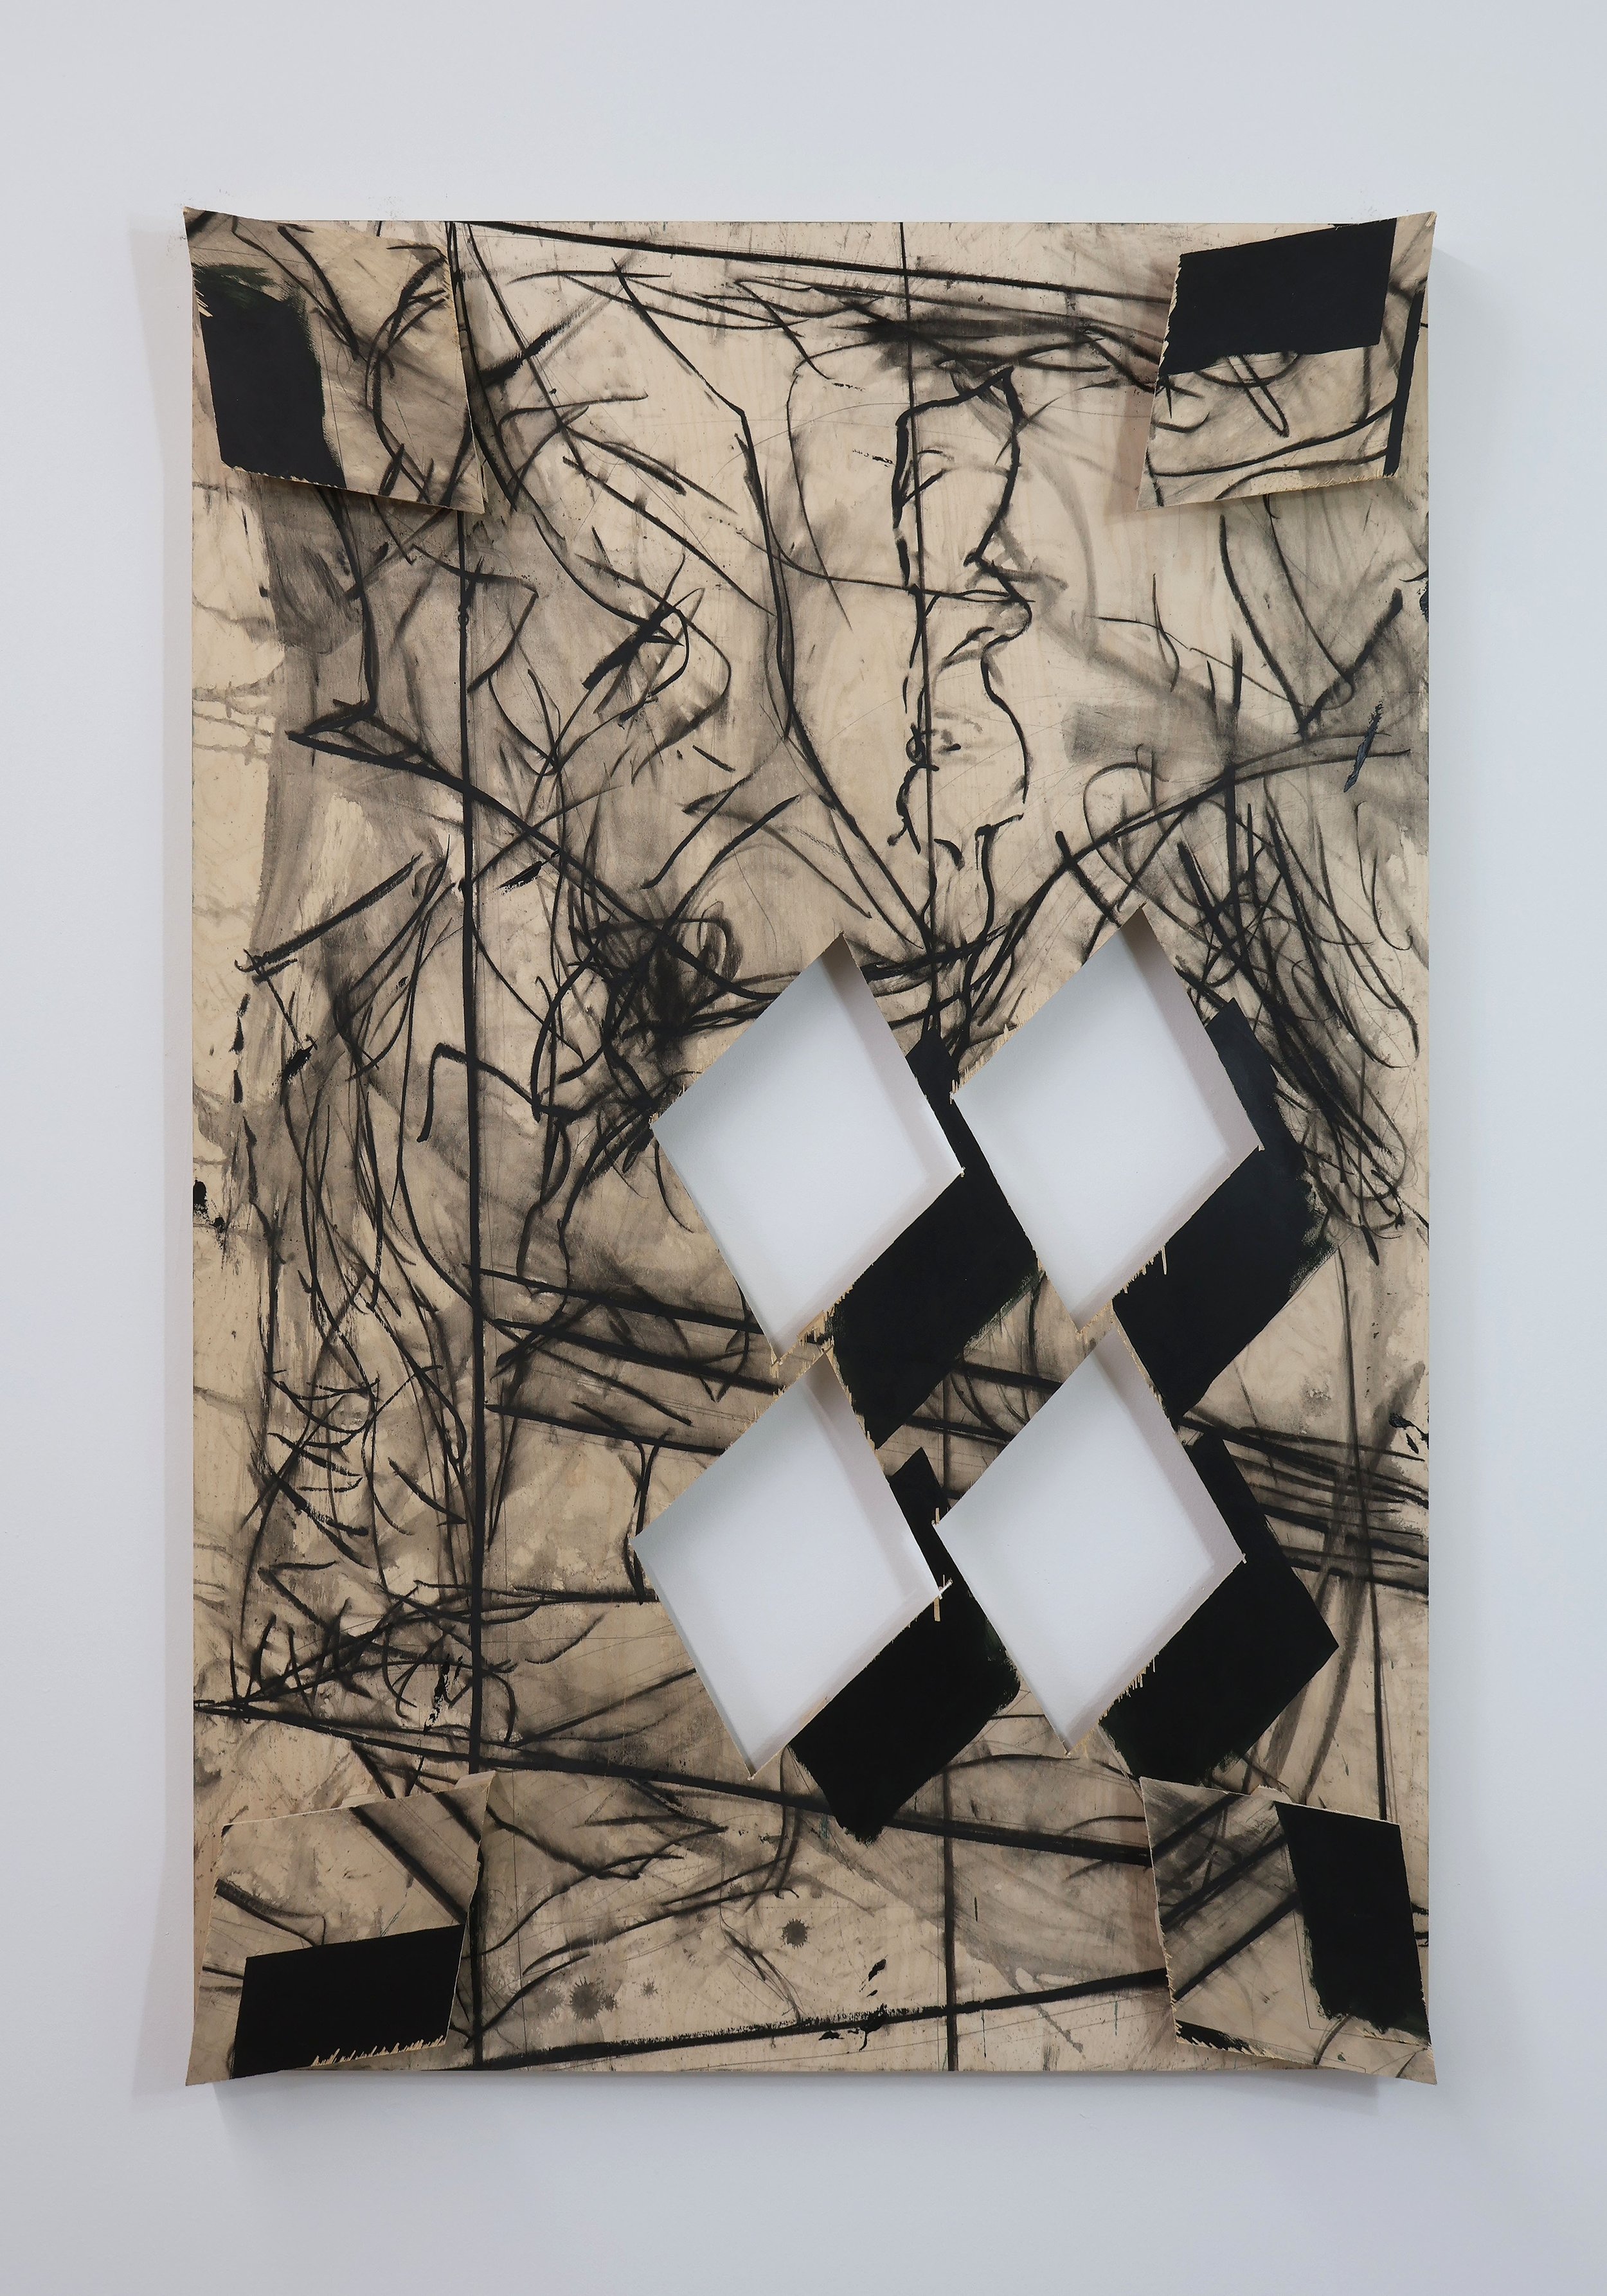  Untitled  Acrylic, charcoal, graphite pencil on wood panel.   60 x 40 x 2 in.  2022 